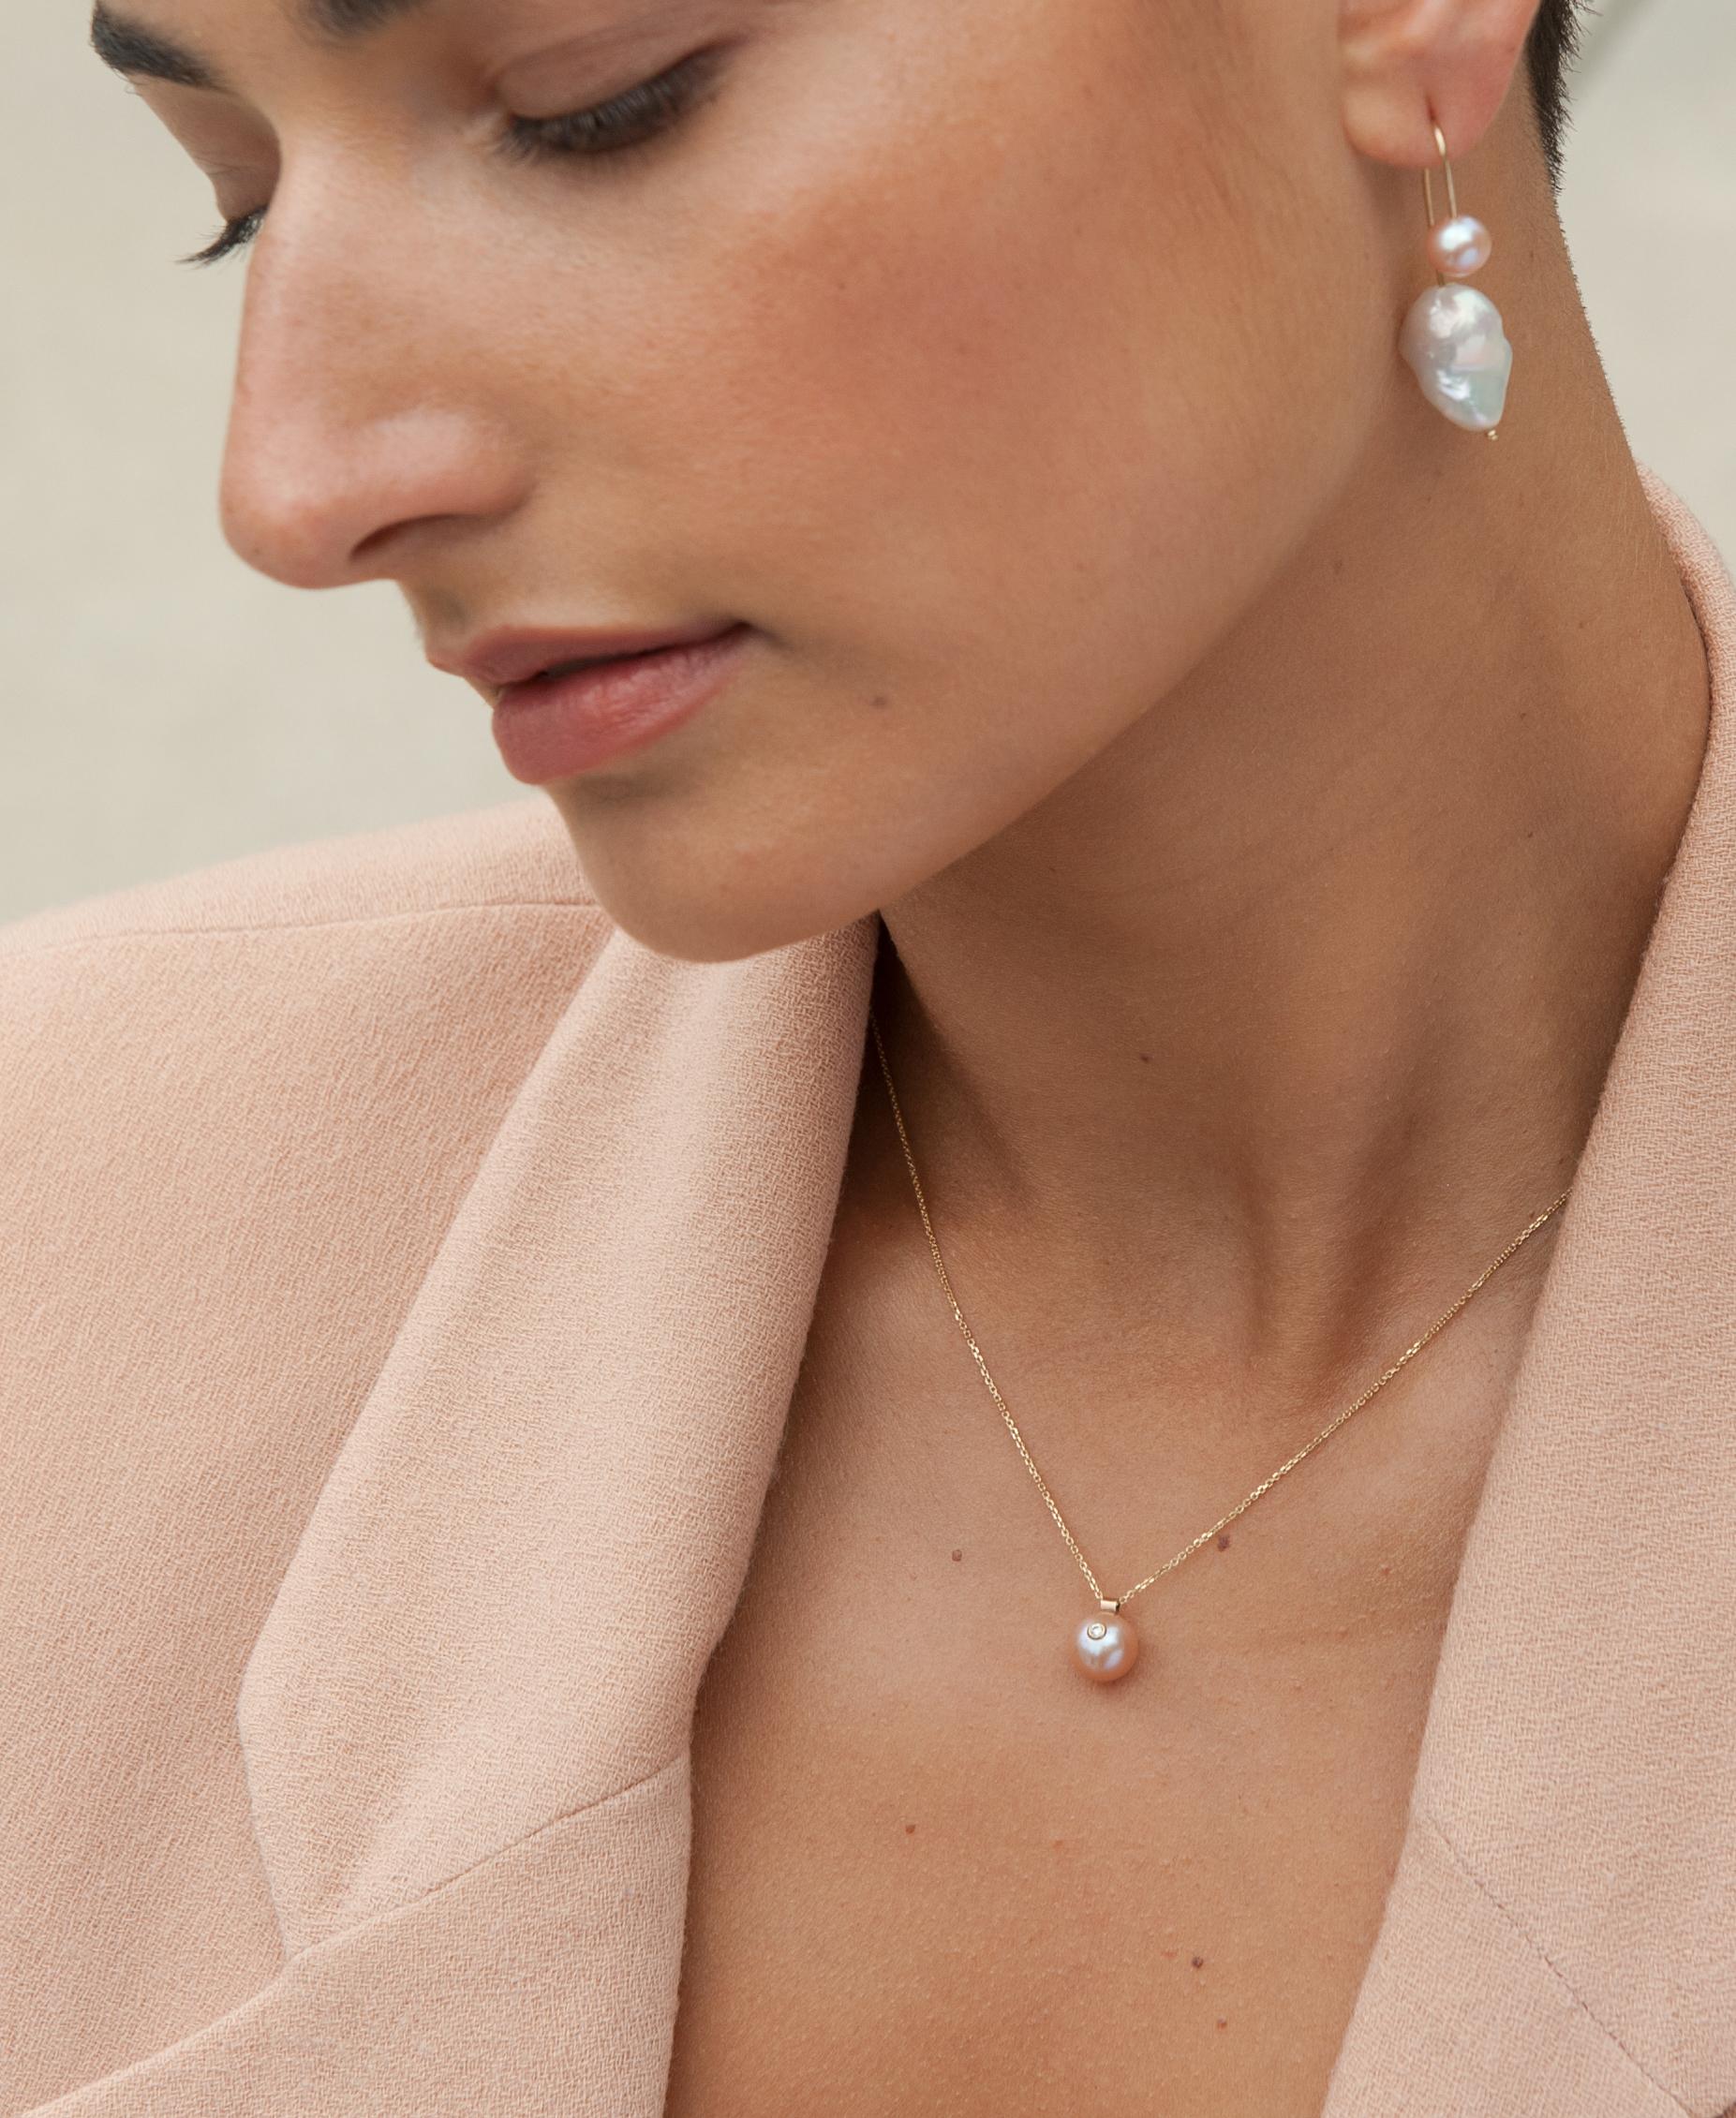 Elegant, feminine, unexpected.  This customizable pearl and diamond necklace (we call it The Everly) feels luxurious, while being delicate and timeless.  Wear it against bare skin or over a lightweight turtleneck for cooler temperatures. Great for